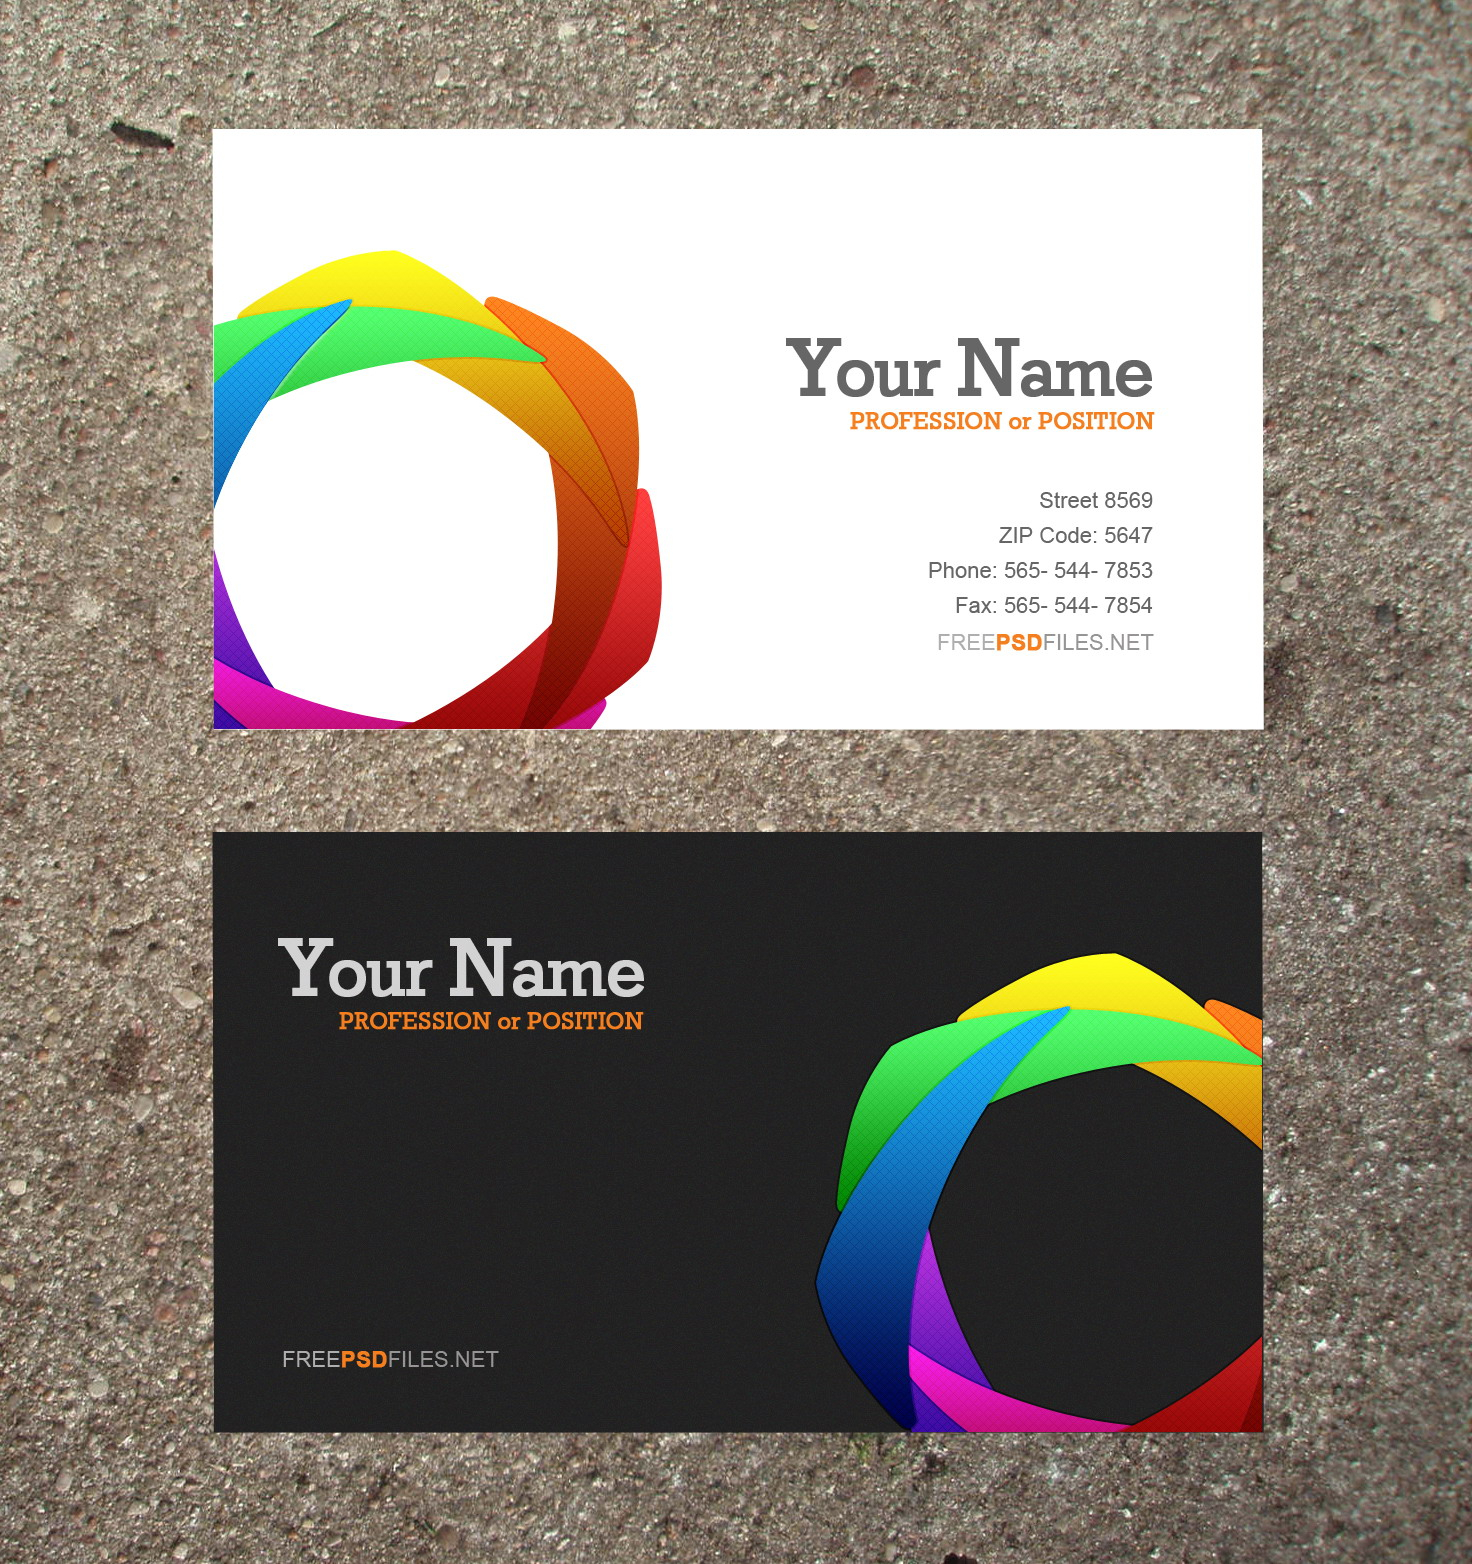 16 Business Card Templates Images – Free Business Card In Microsoft Templates For Business Cards